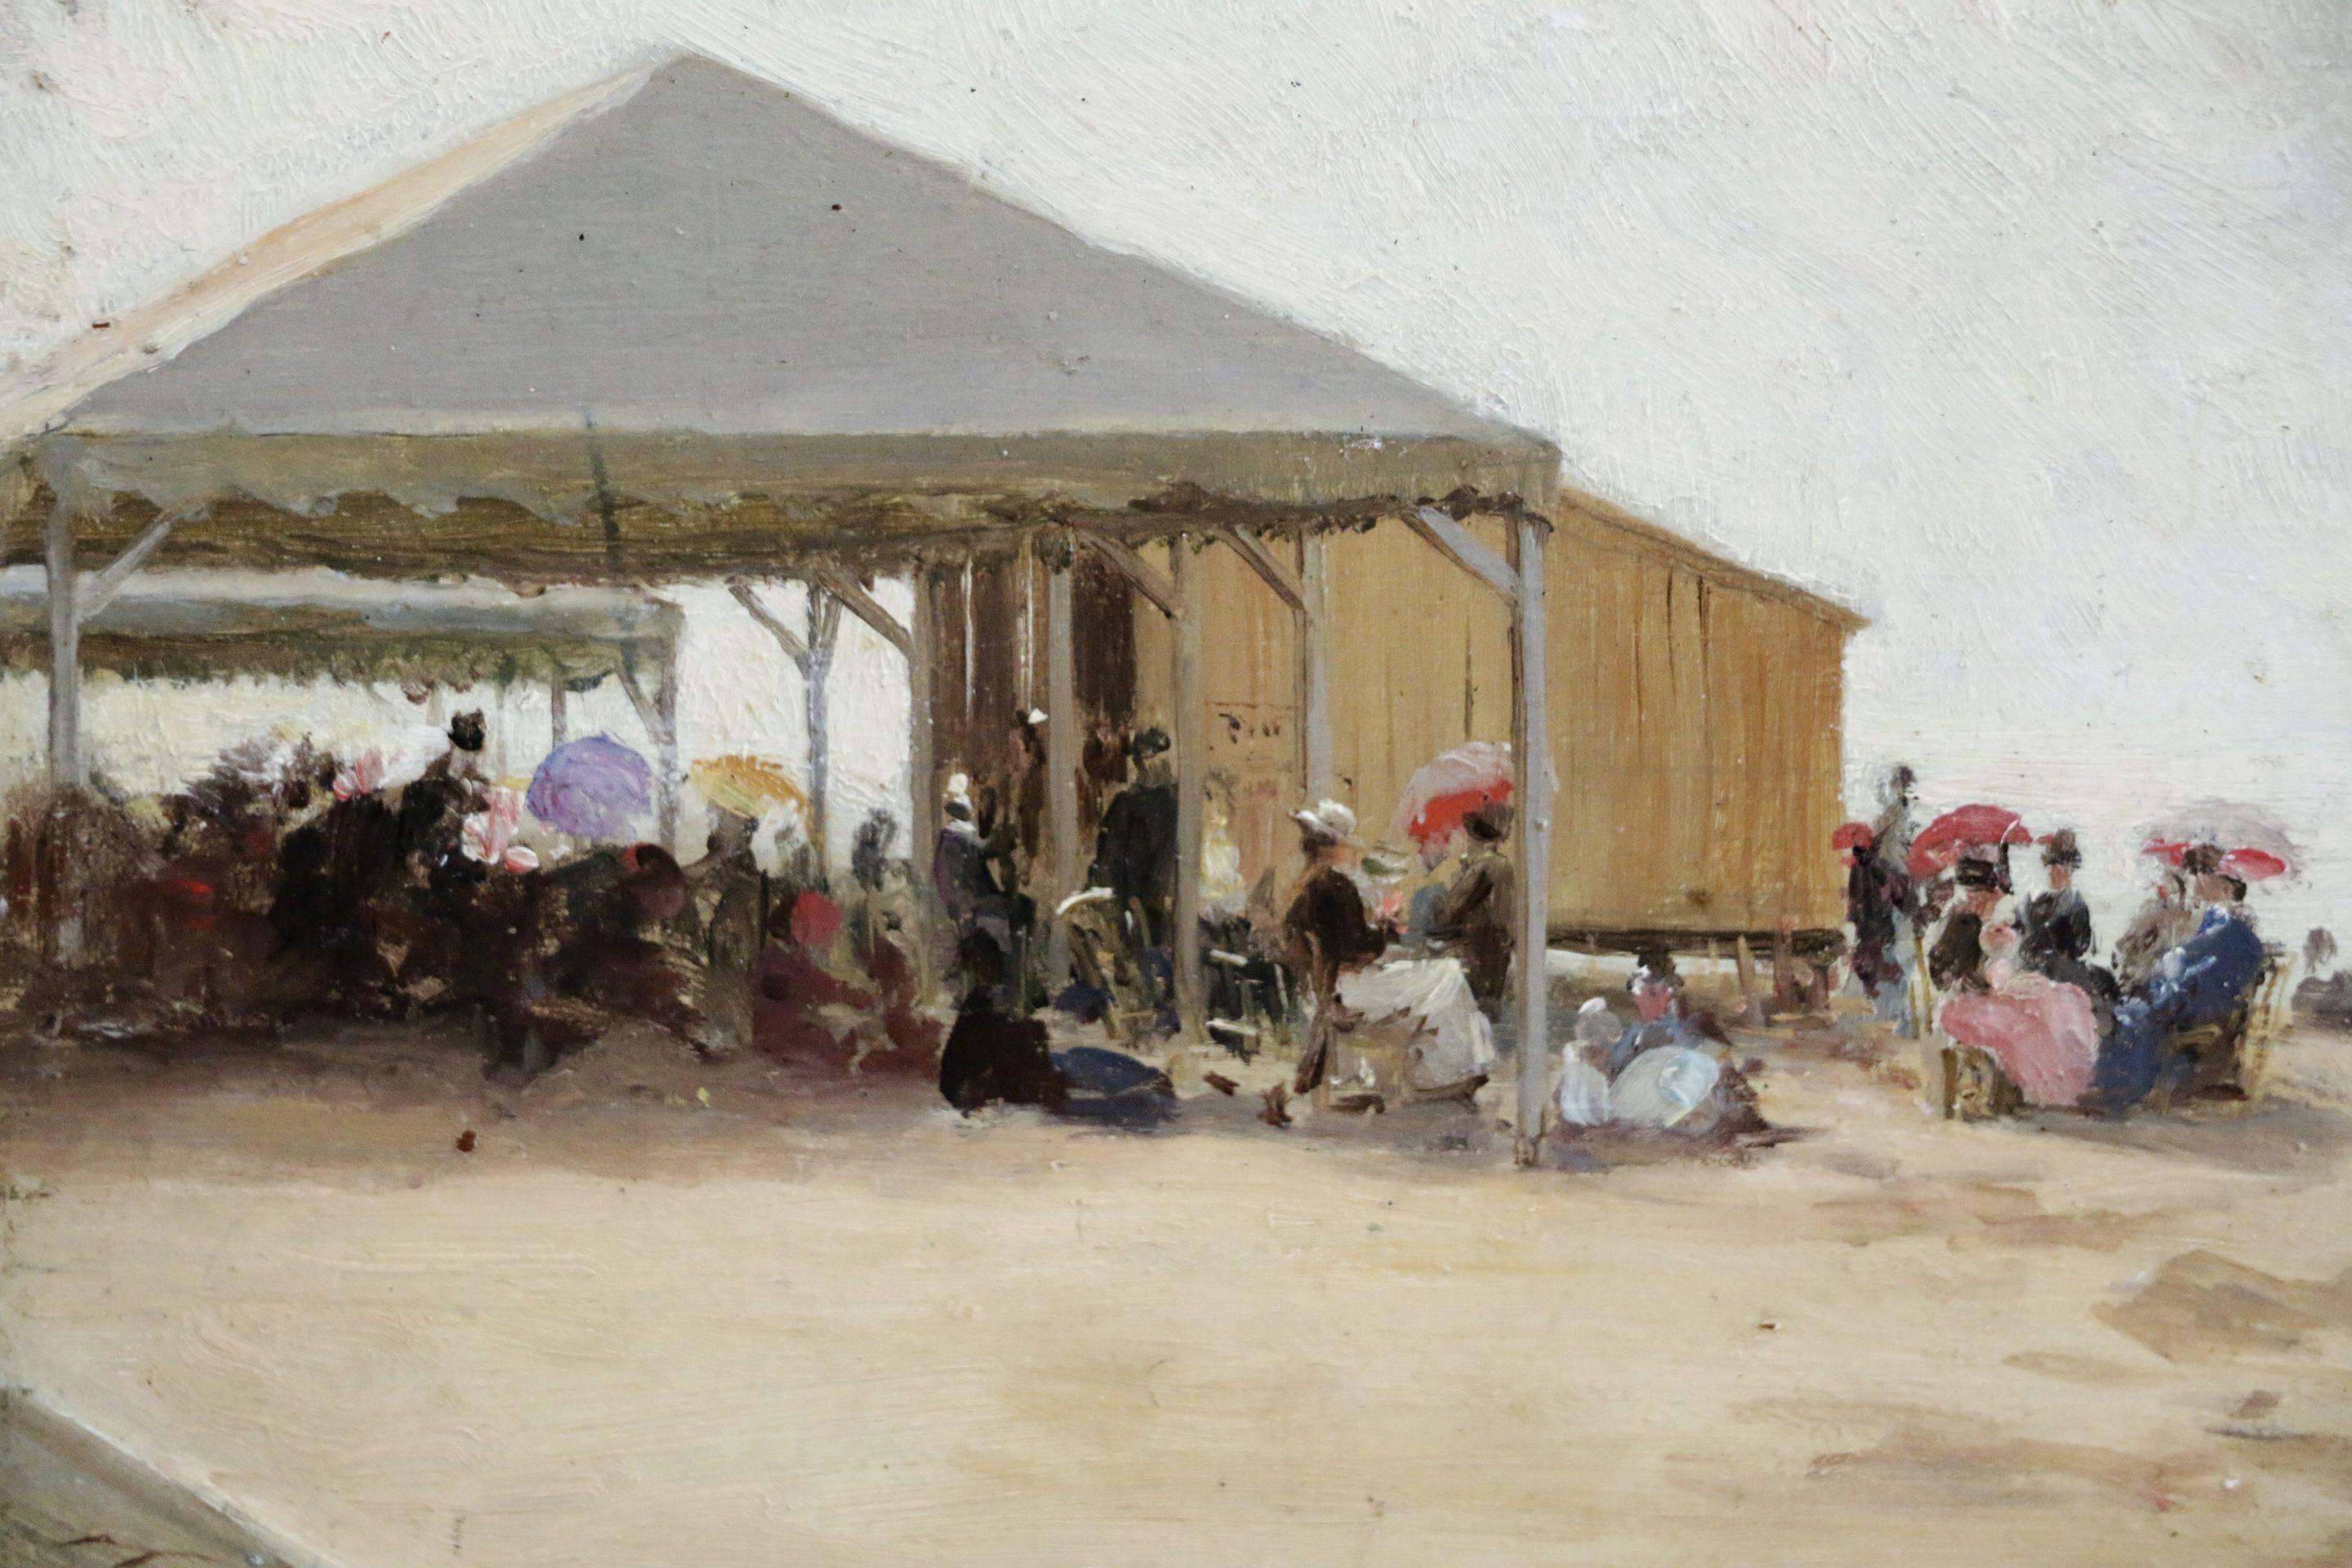 C.1885 French Impressionist School (Founded C.1870) - Sur La Plage - Painting by Unknown